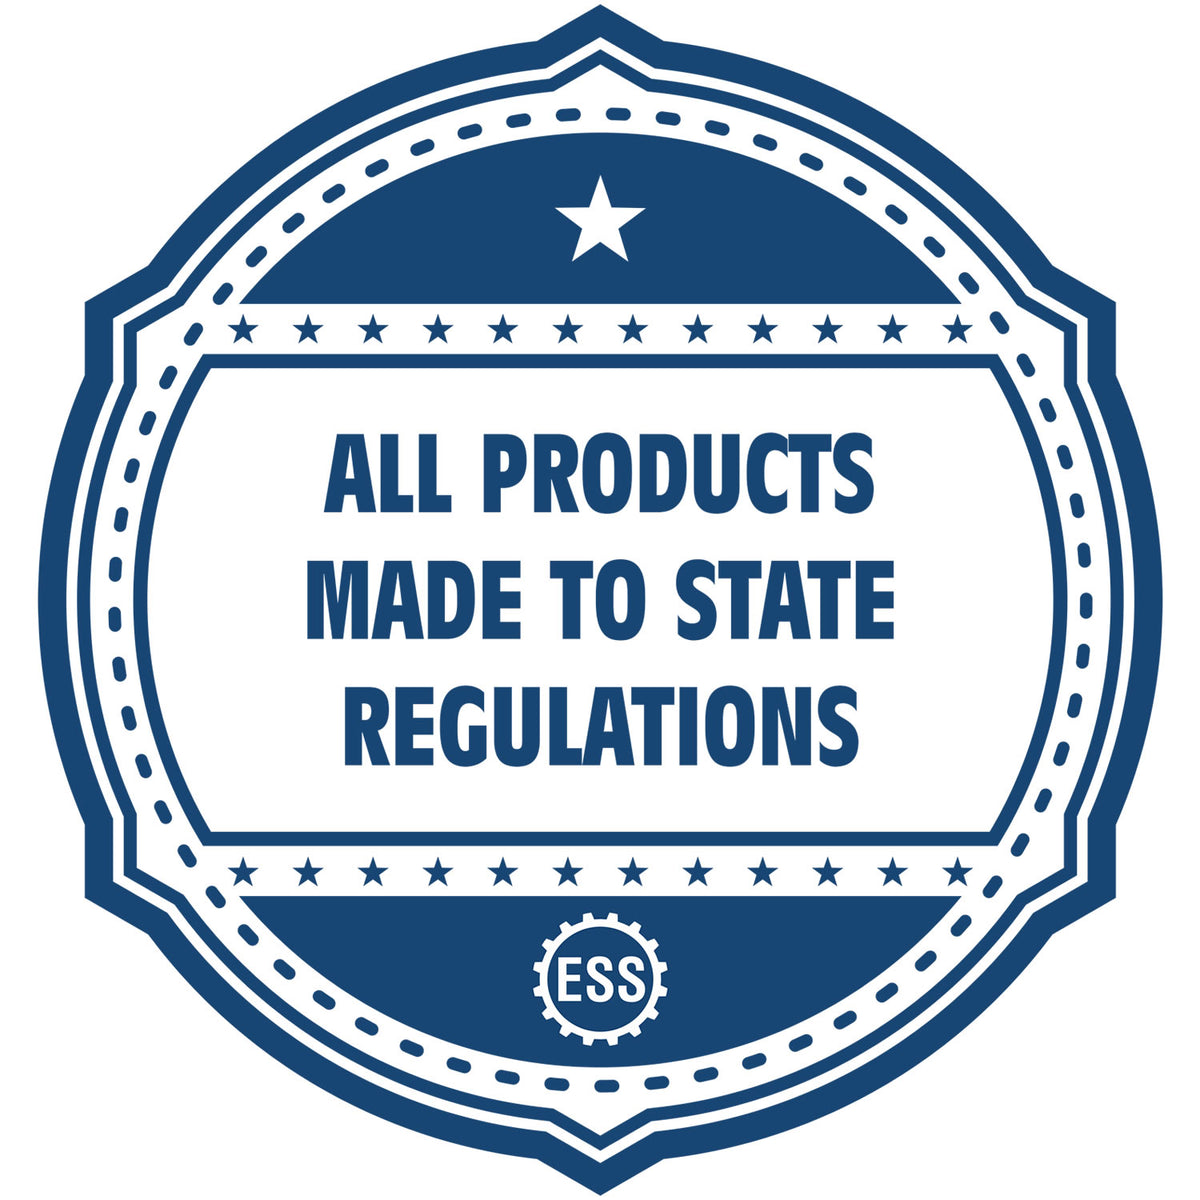 A blue icon or badge for the Hybrid Montana Engineer Seal showing that this product is made in compliance with state regulations.